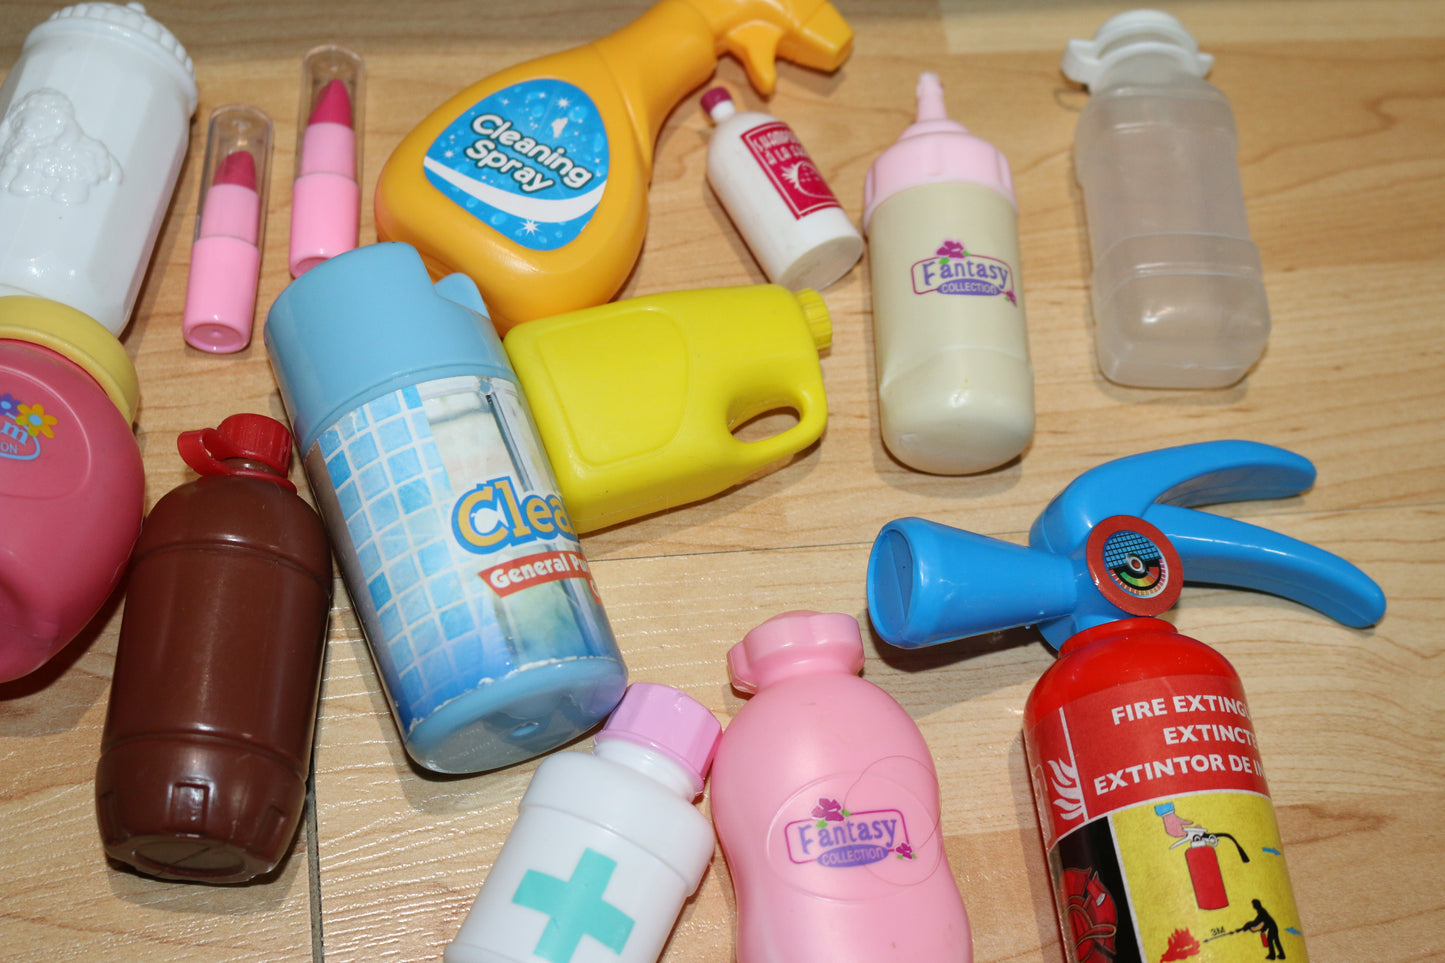 Play Toys cleaning, pharmacy bathroom girls Mixed Lot Played With Condition